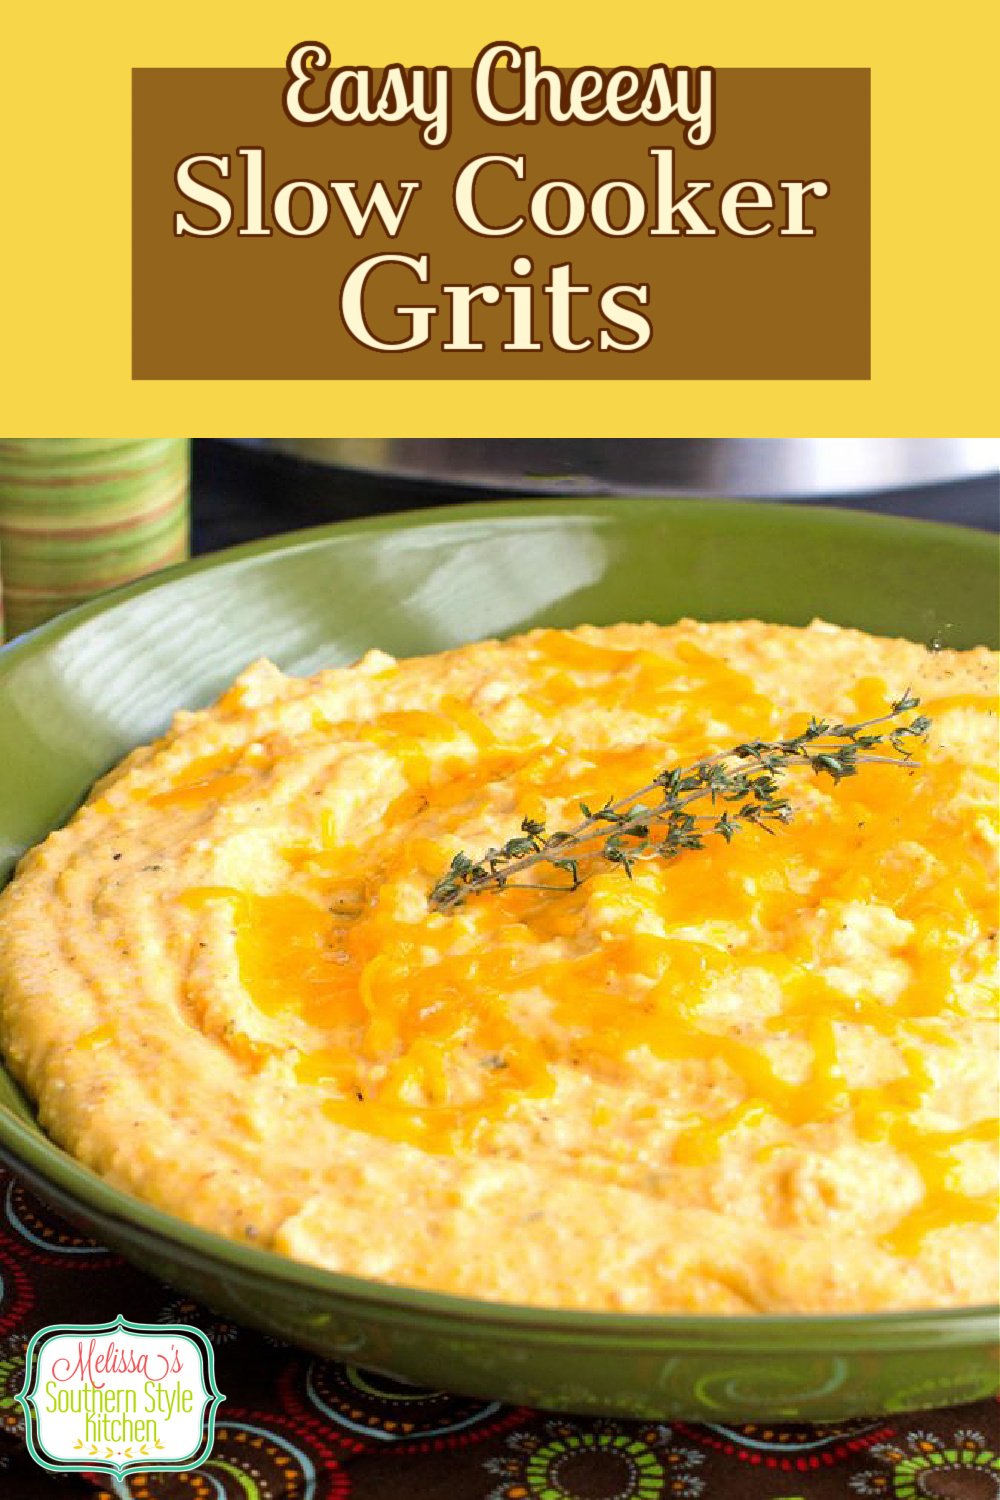 Once you make these dreamy Easy Cheesy Slow Cooker Grits in your crockpot you'll be hooked #cheesegrits #grits #slowcookedgrits #Southerngrits #southernrecipes #sidedishrecipes #cheddarcheese #crockpotrecipes #slowcookerrecipes #brunch #breakfast #dinner #dinnerideas